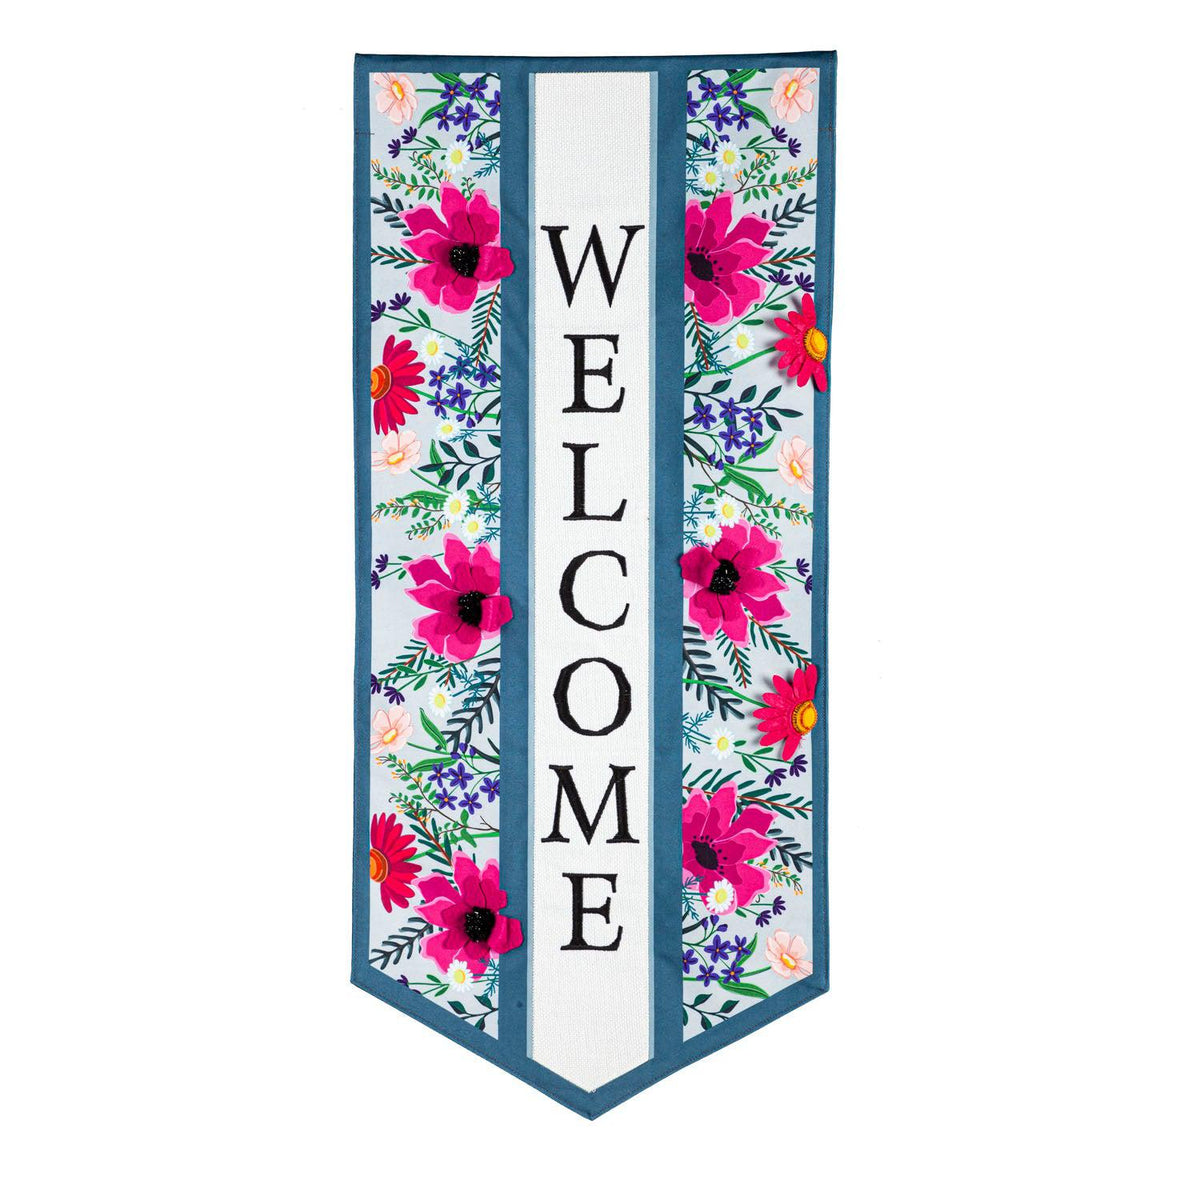 Enjoy the season with the Wildflowers Welcome Textile Décor from the Everlasting Impressions collection. This extra-long garden flag features a variety of bright Spring flowers and the word "Welcome" running vertically down the center.